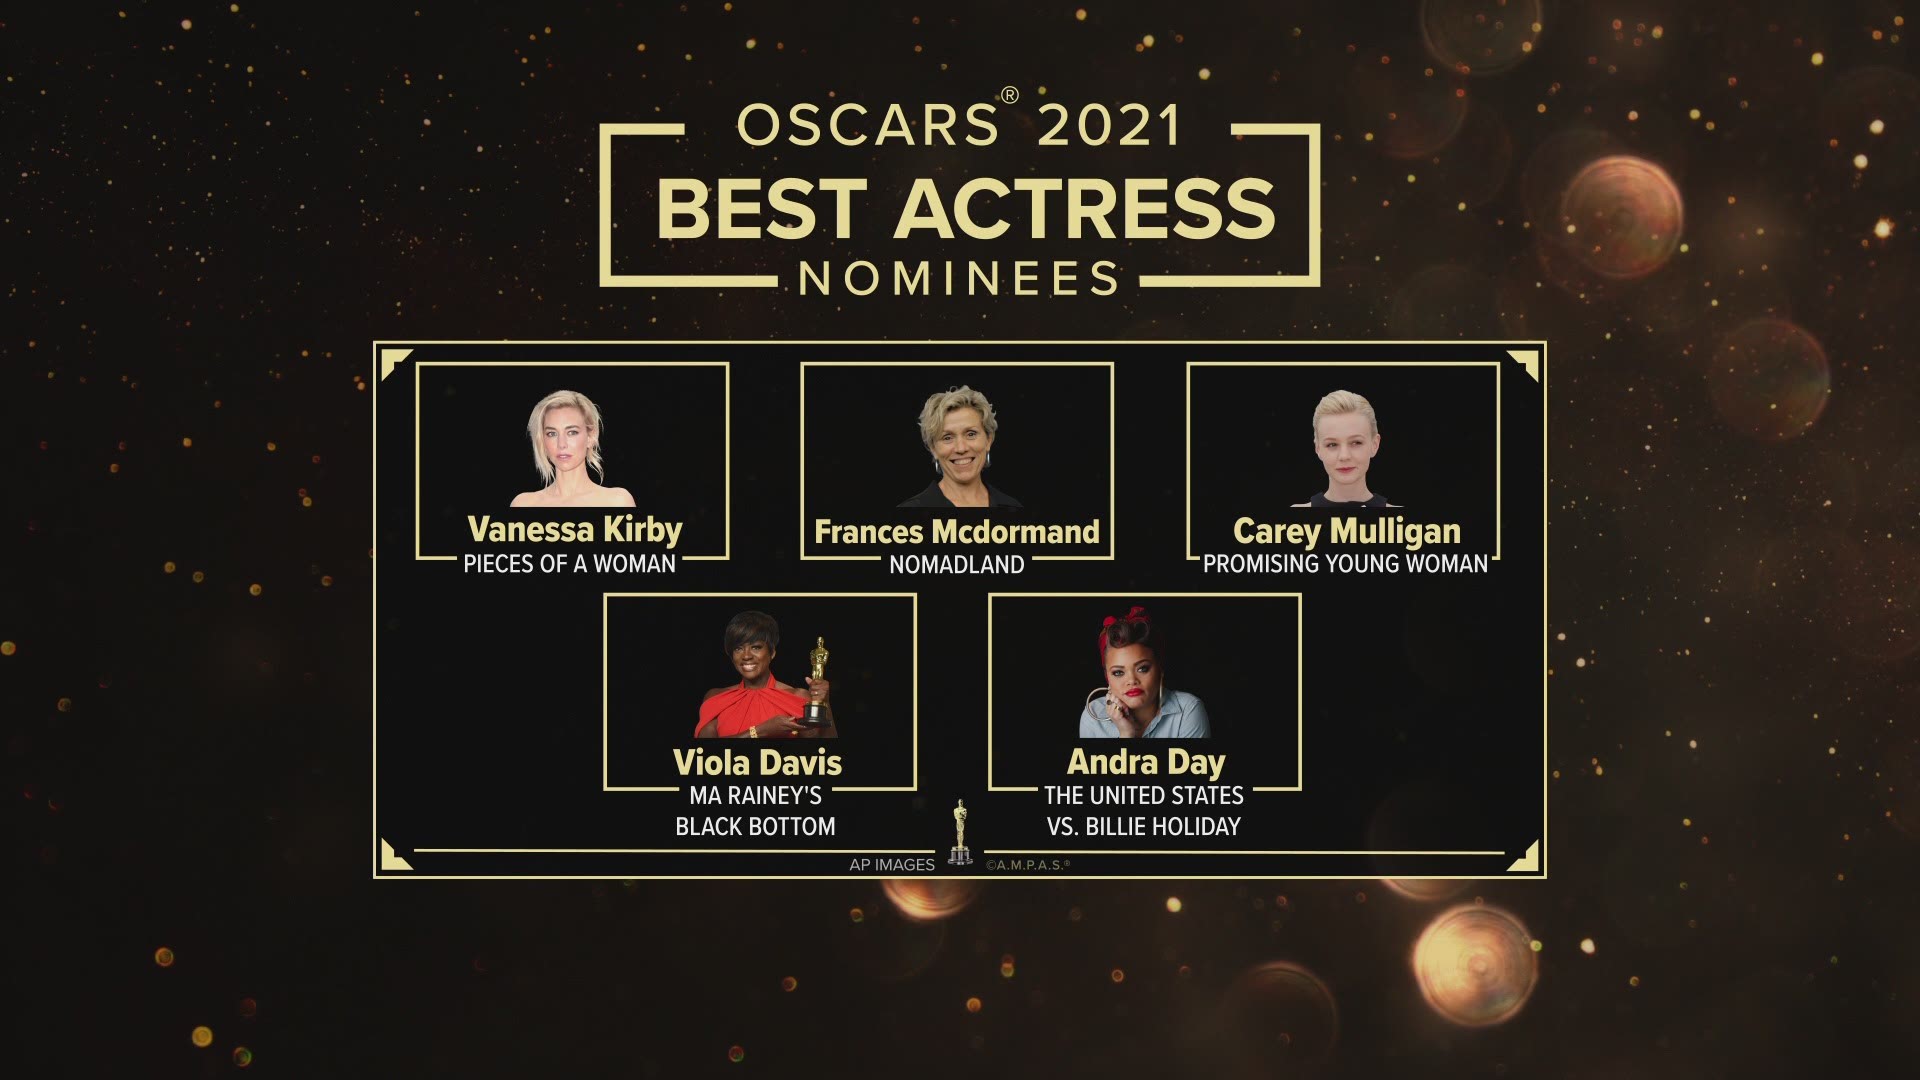 2021 Best Actress Nominees: Mark S Allen previews the 93rd Academy Awards